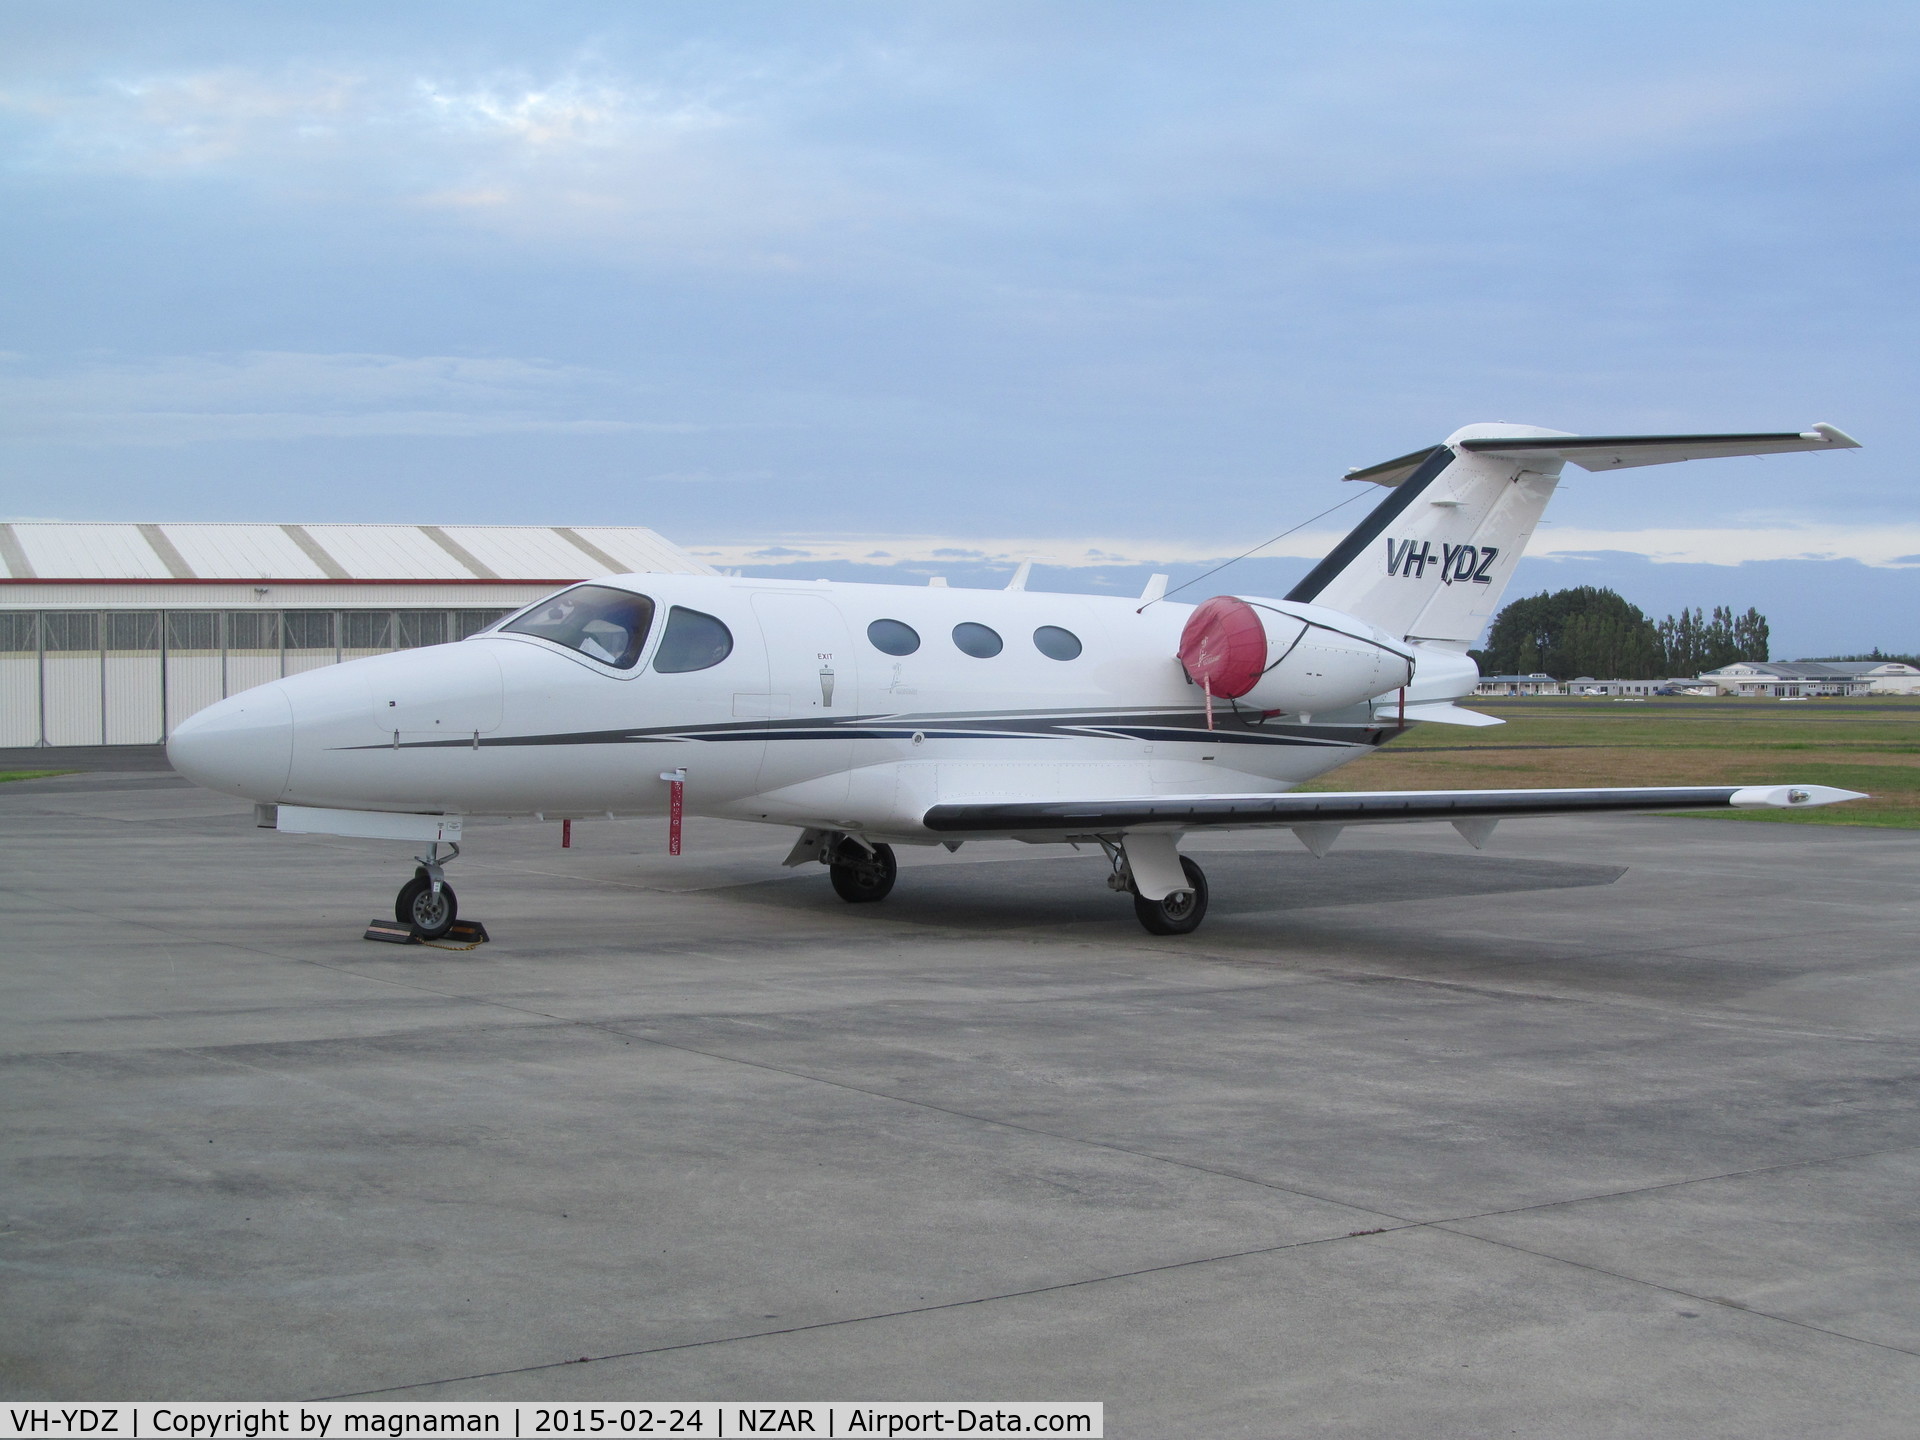 VH-YDZ, 2008 Cessna 510 Citation Mustang Citation Mustang C/N 510-0070, At Ardmore following delivery to new owner last night via AKL. To become ZK- registered.